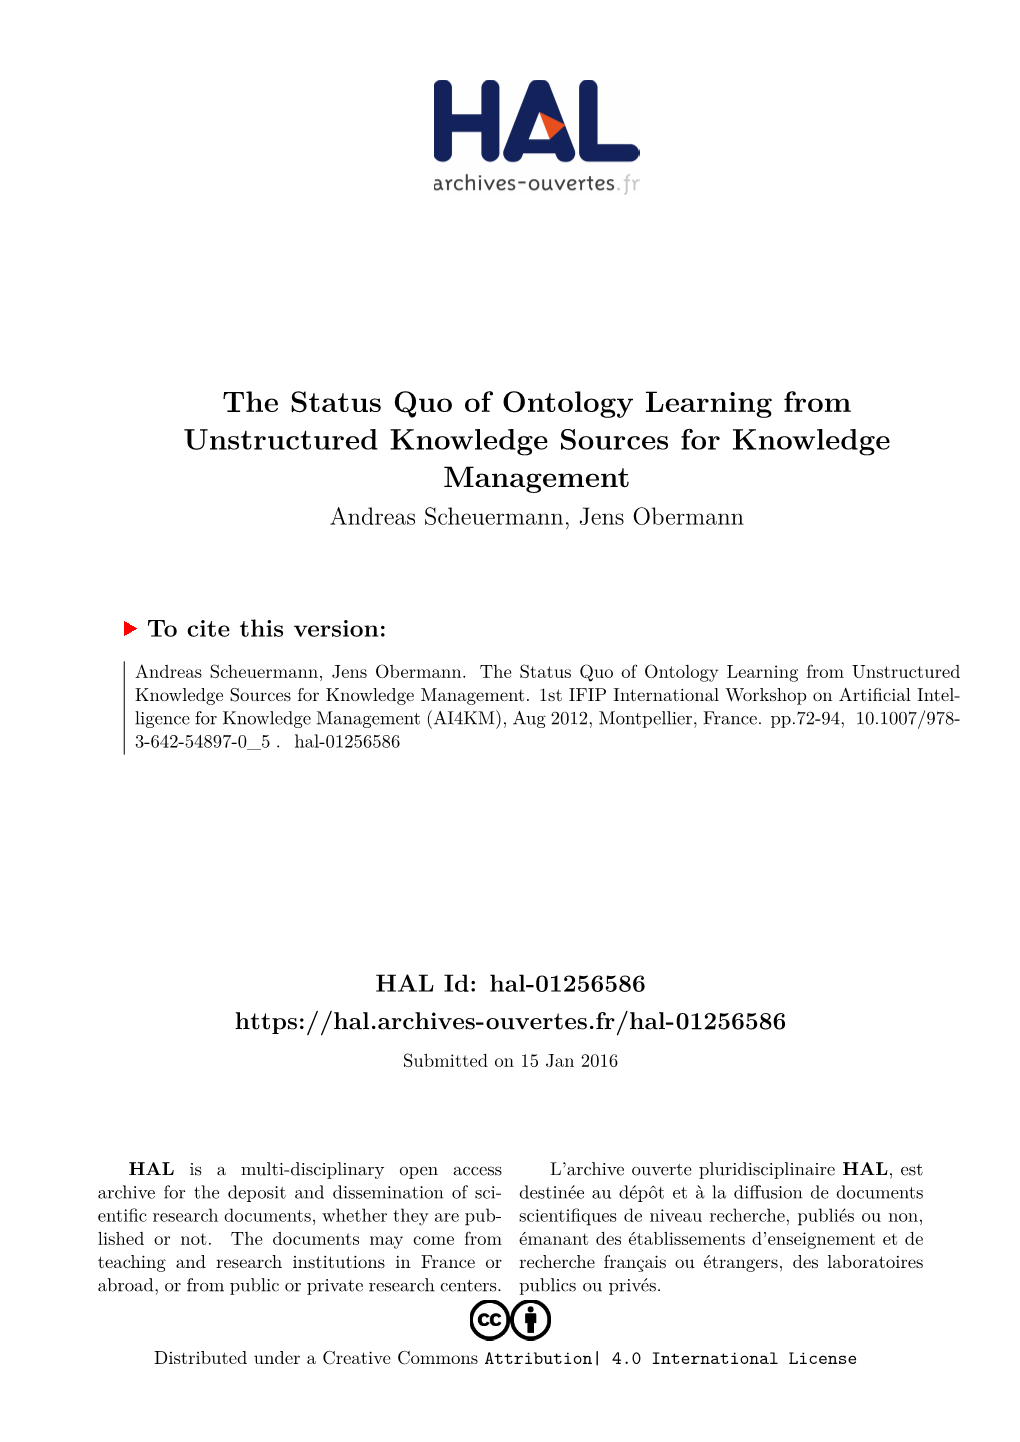 The Status Quo of Ontology Learning from Unstructured Knowledge Sources for Knowledge Management Andreas Scheuermann, Jens Obermann